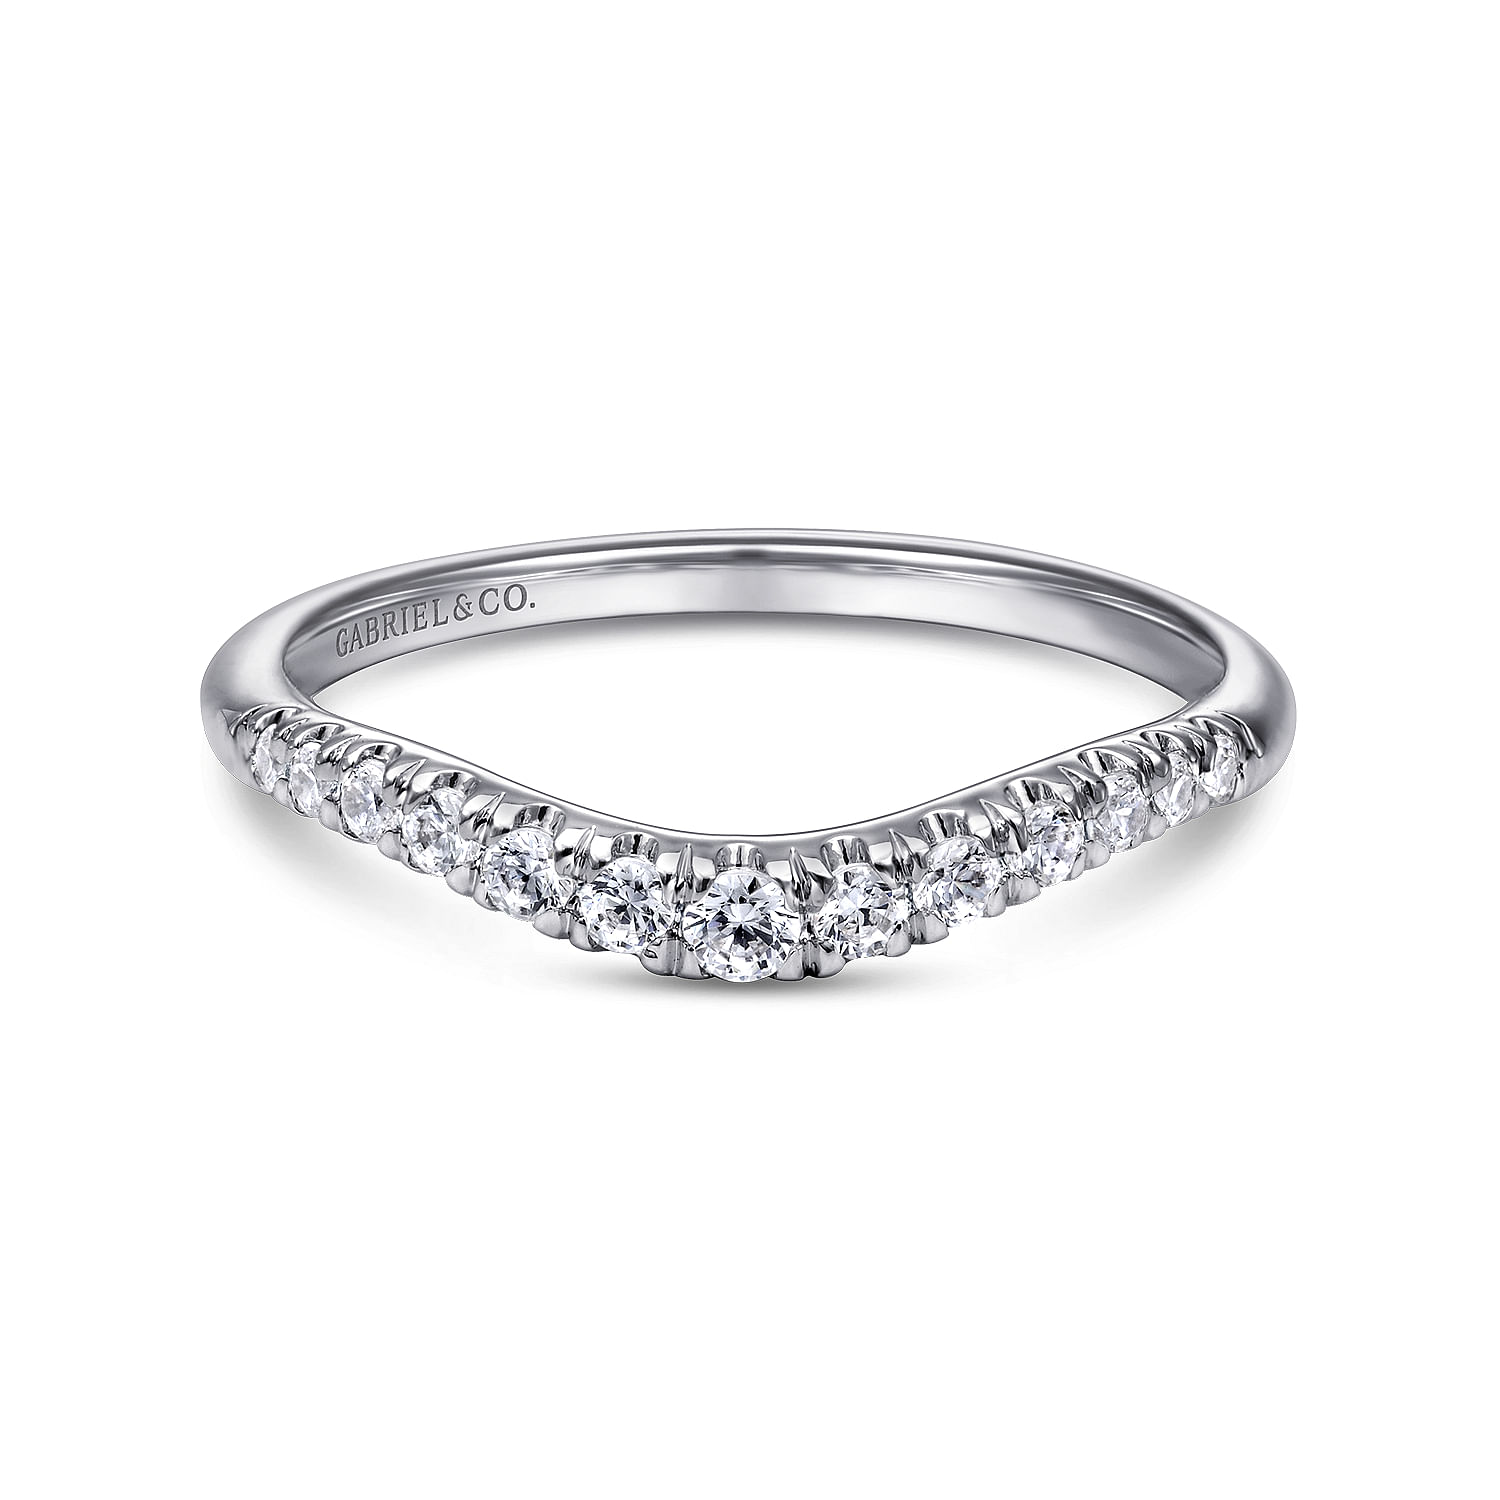 Annecy - Curved 14K White Gold French Pave Diamond Wedding Band